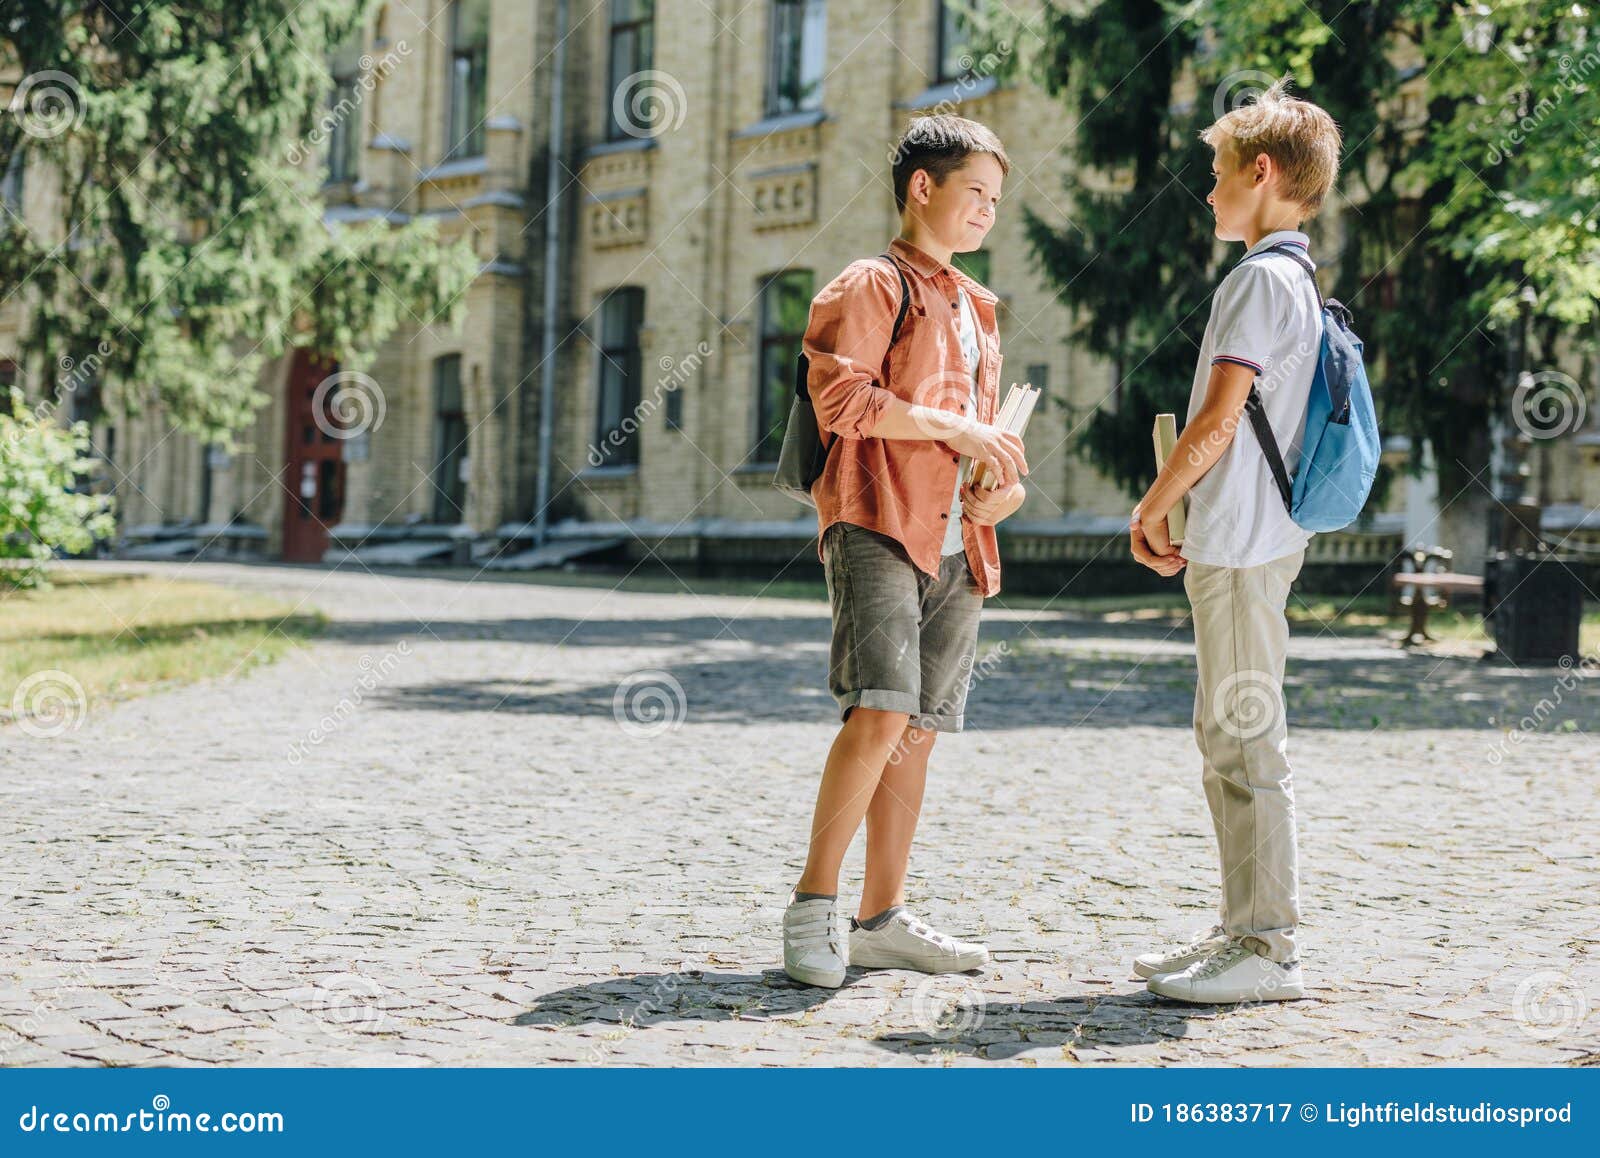 cute schoolboys holding books and speaking while standing in schoolyard